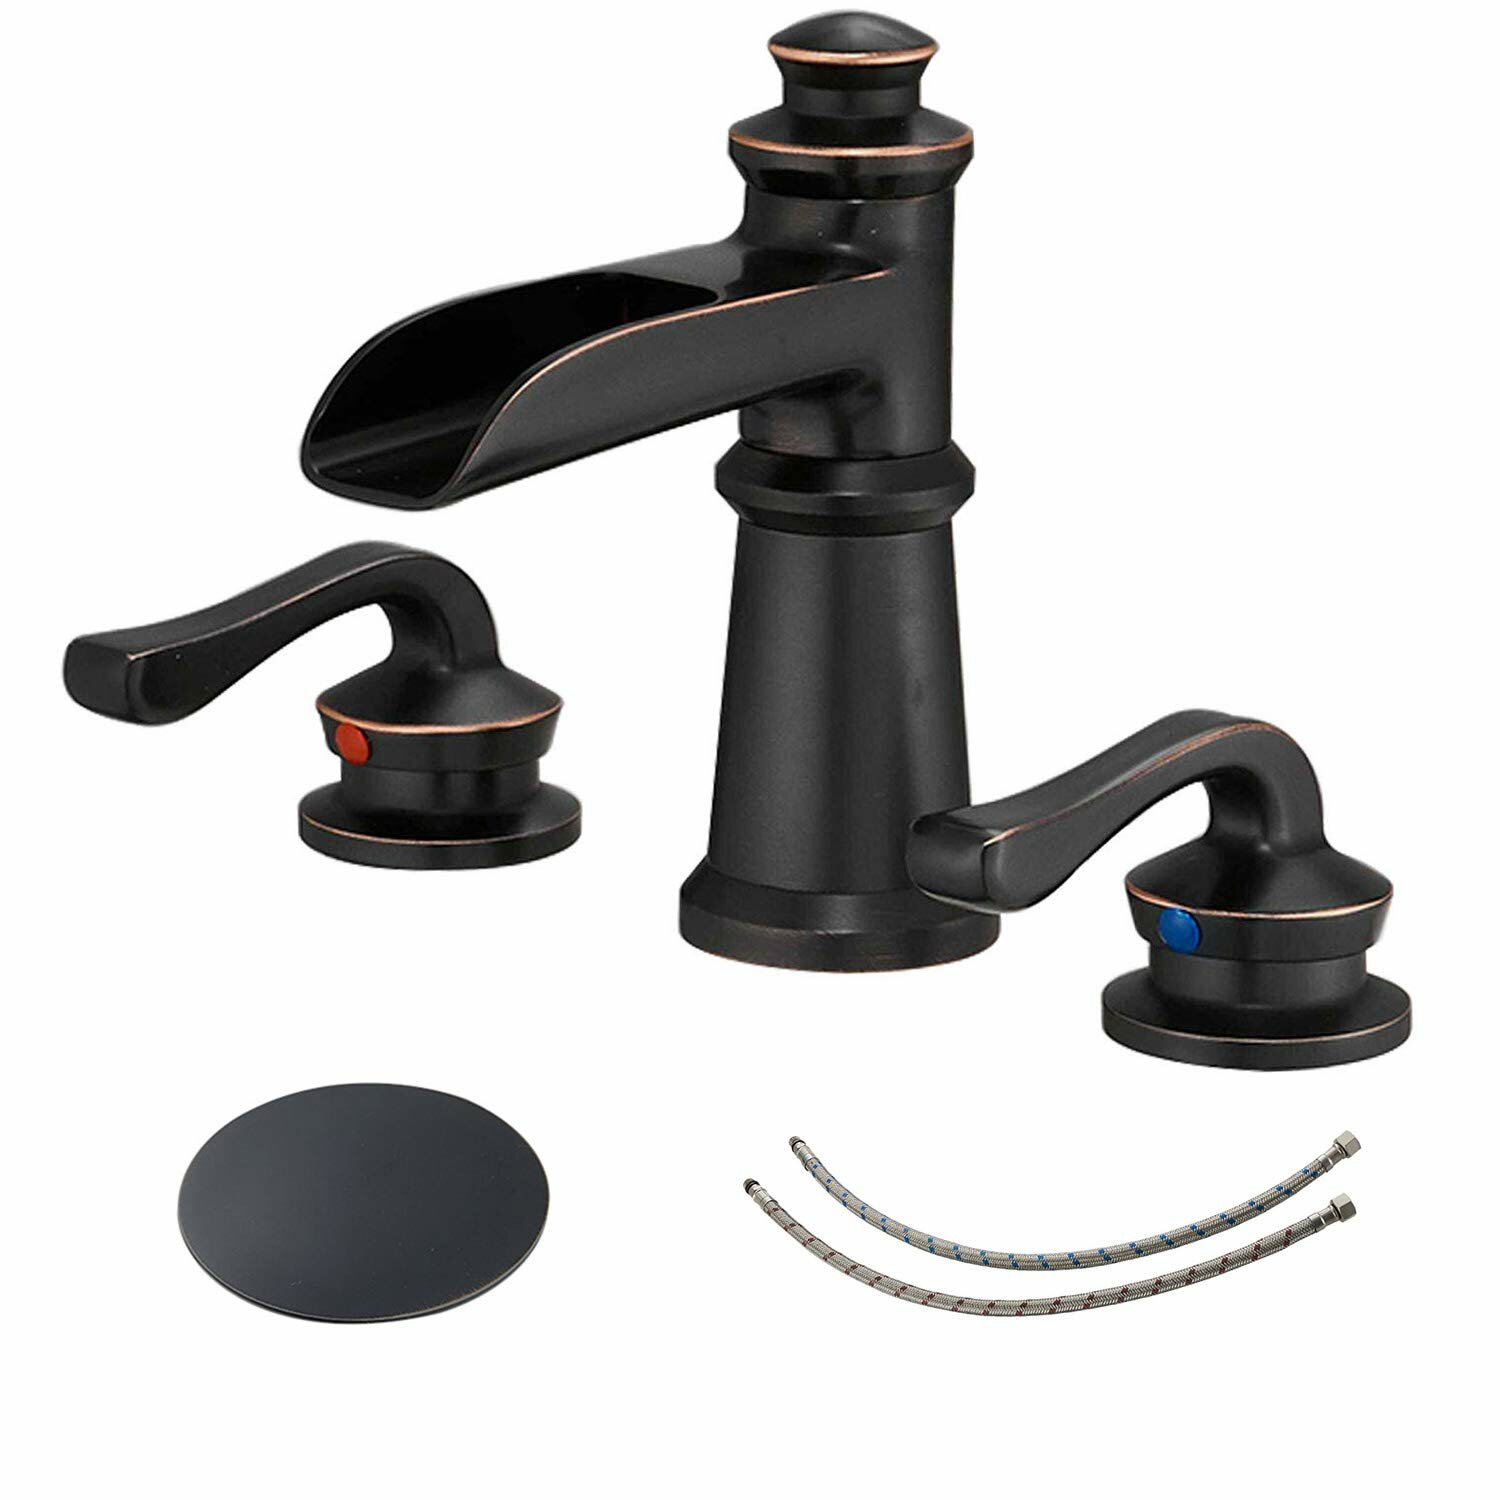 Bathadore Waterfall Widespread Bathroom Faucet 3 Hole Oil Rubbed Bronze Farmhouse 8 Inch Pop Up Drain Stopper Assembly Overflow Supply Line Lead Free Faucets Parts Two Handle Bath Vanity Lavatory Sink Wayfair